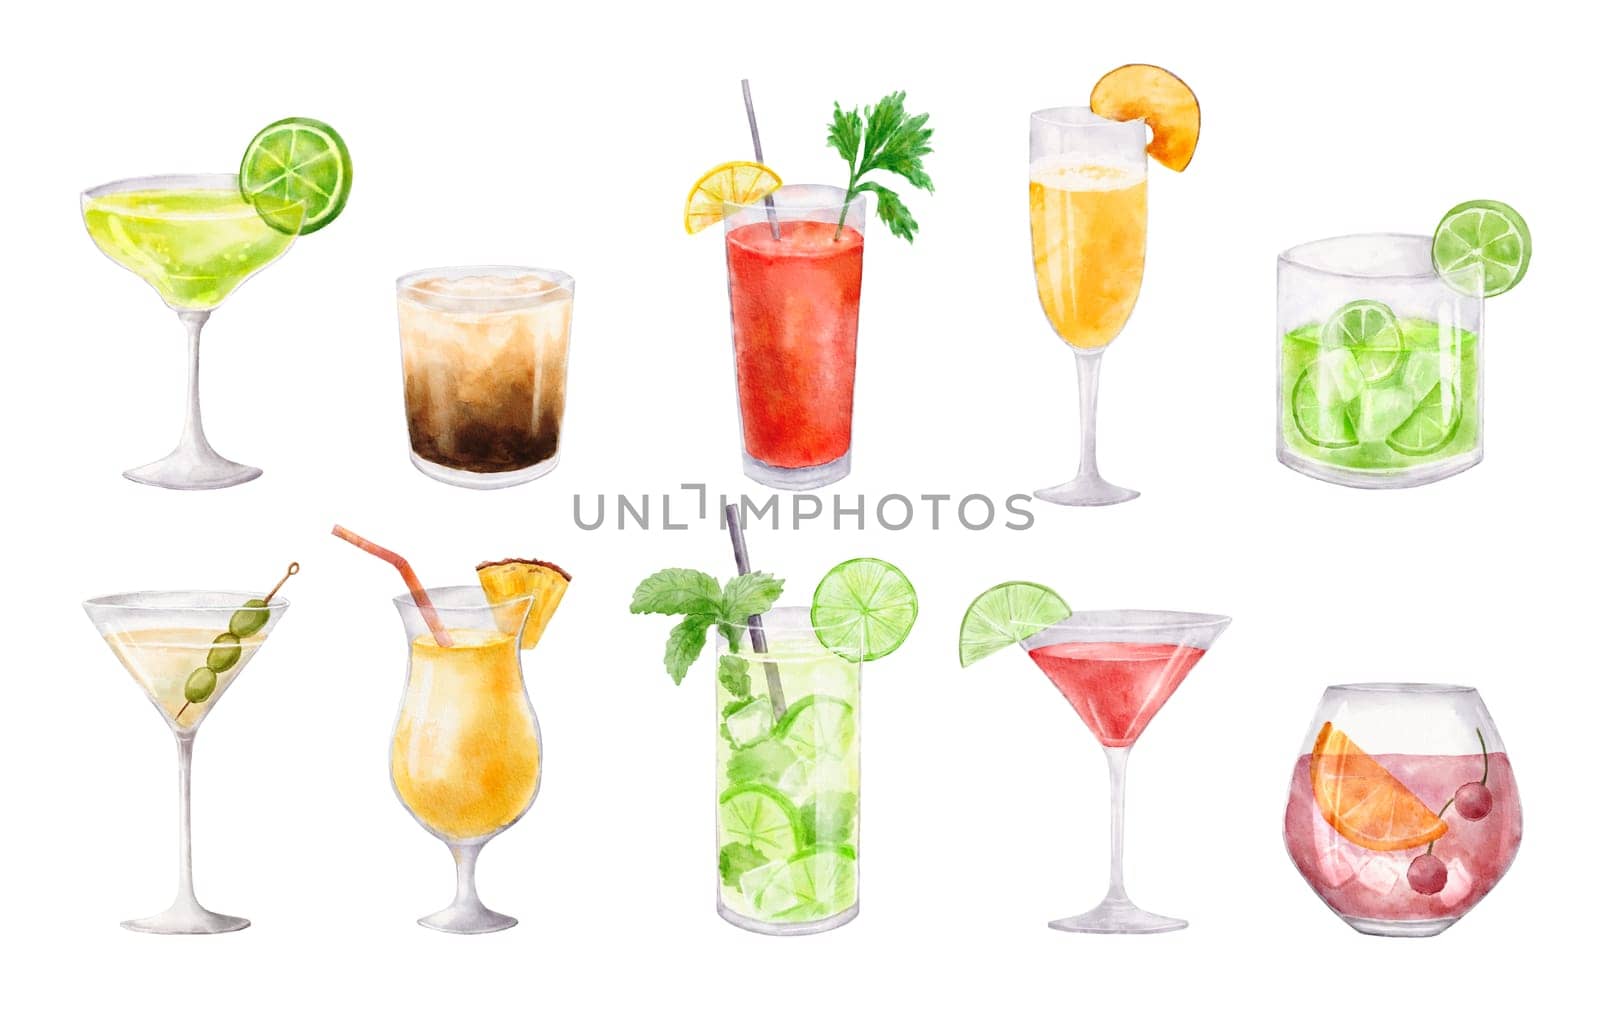 Bloody mary, matrini and cosmopolitan cocktails. Watercolor illustration of drink in glass isolated on white background